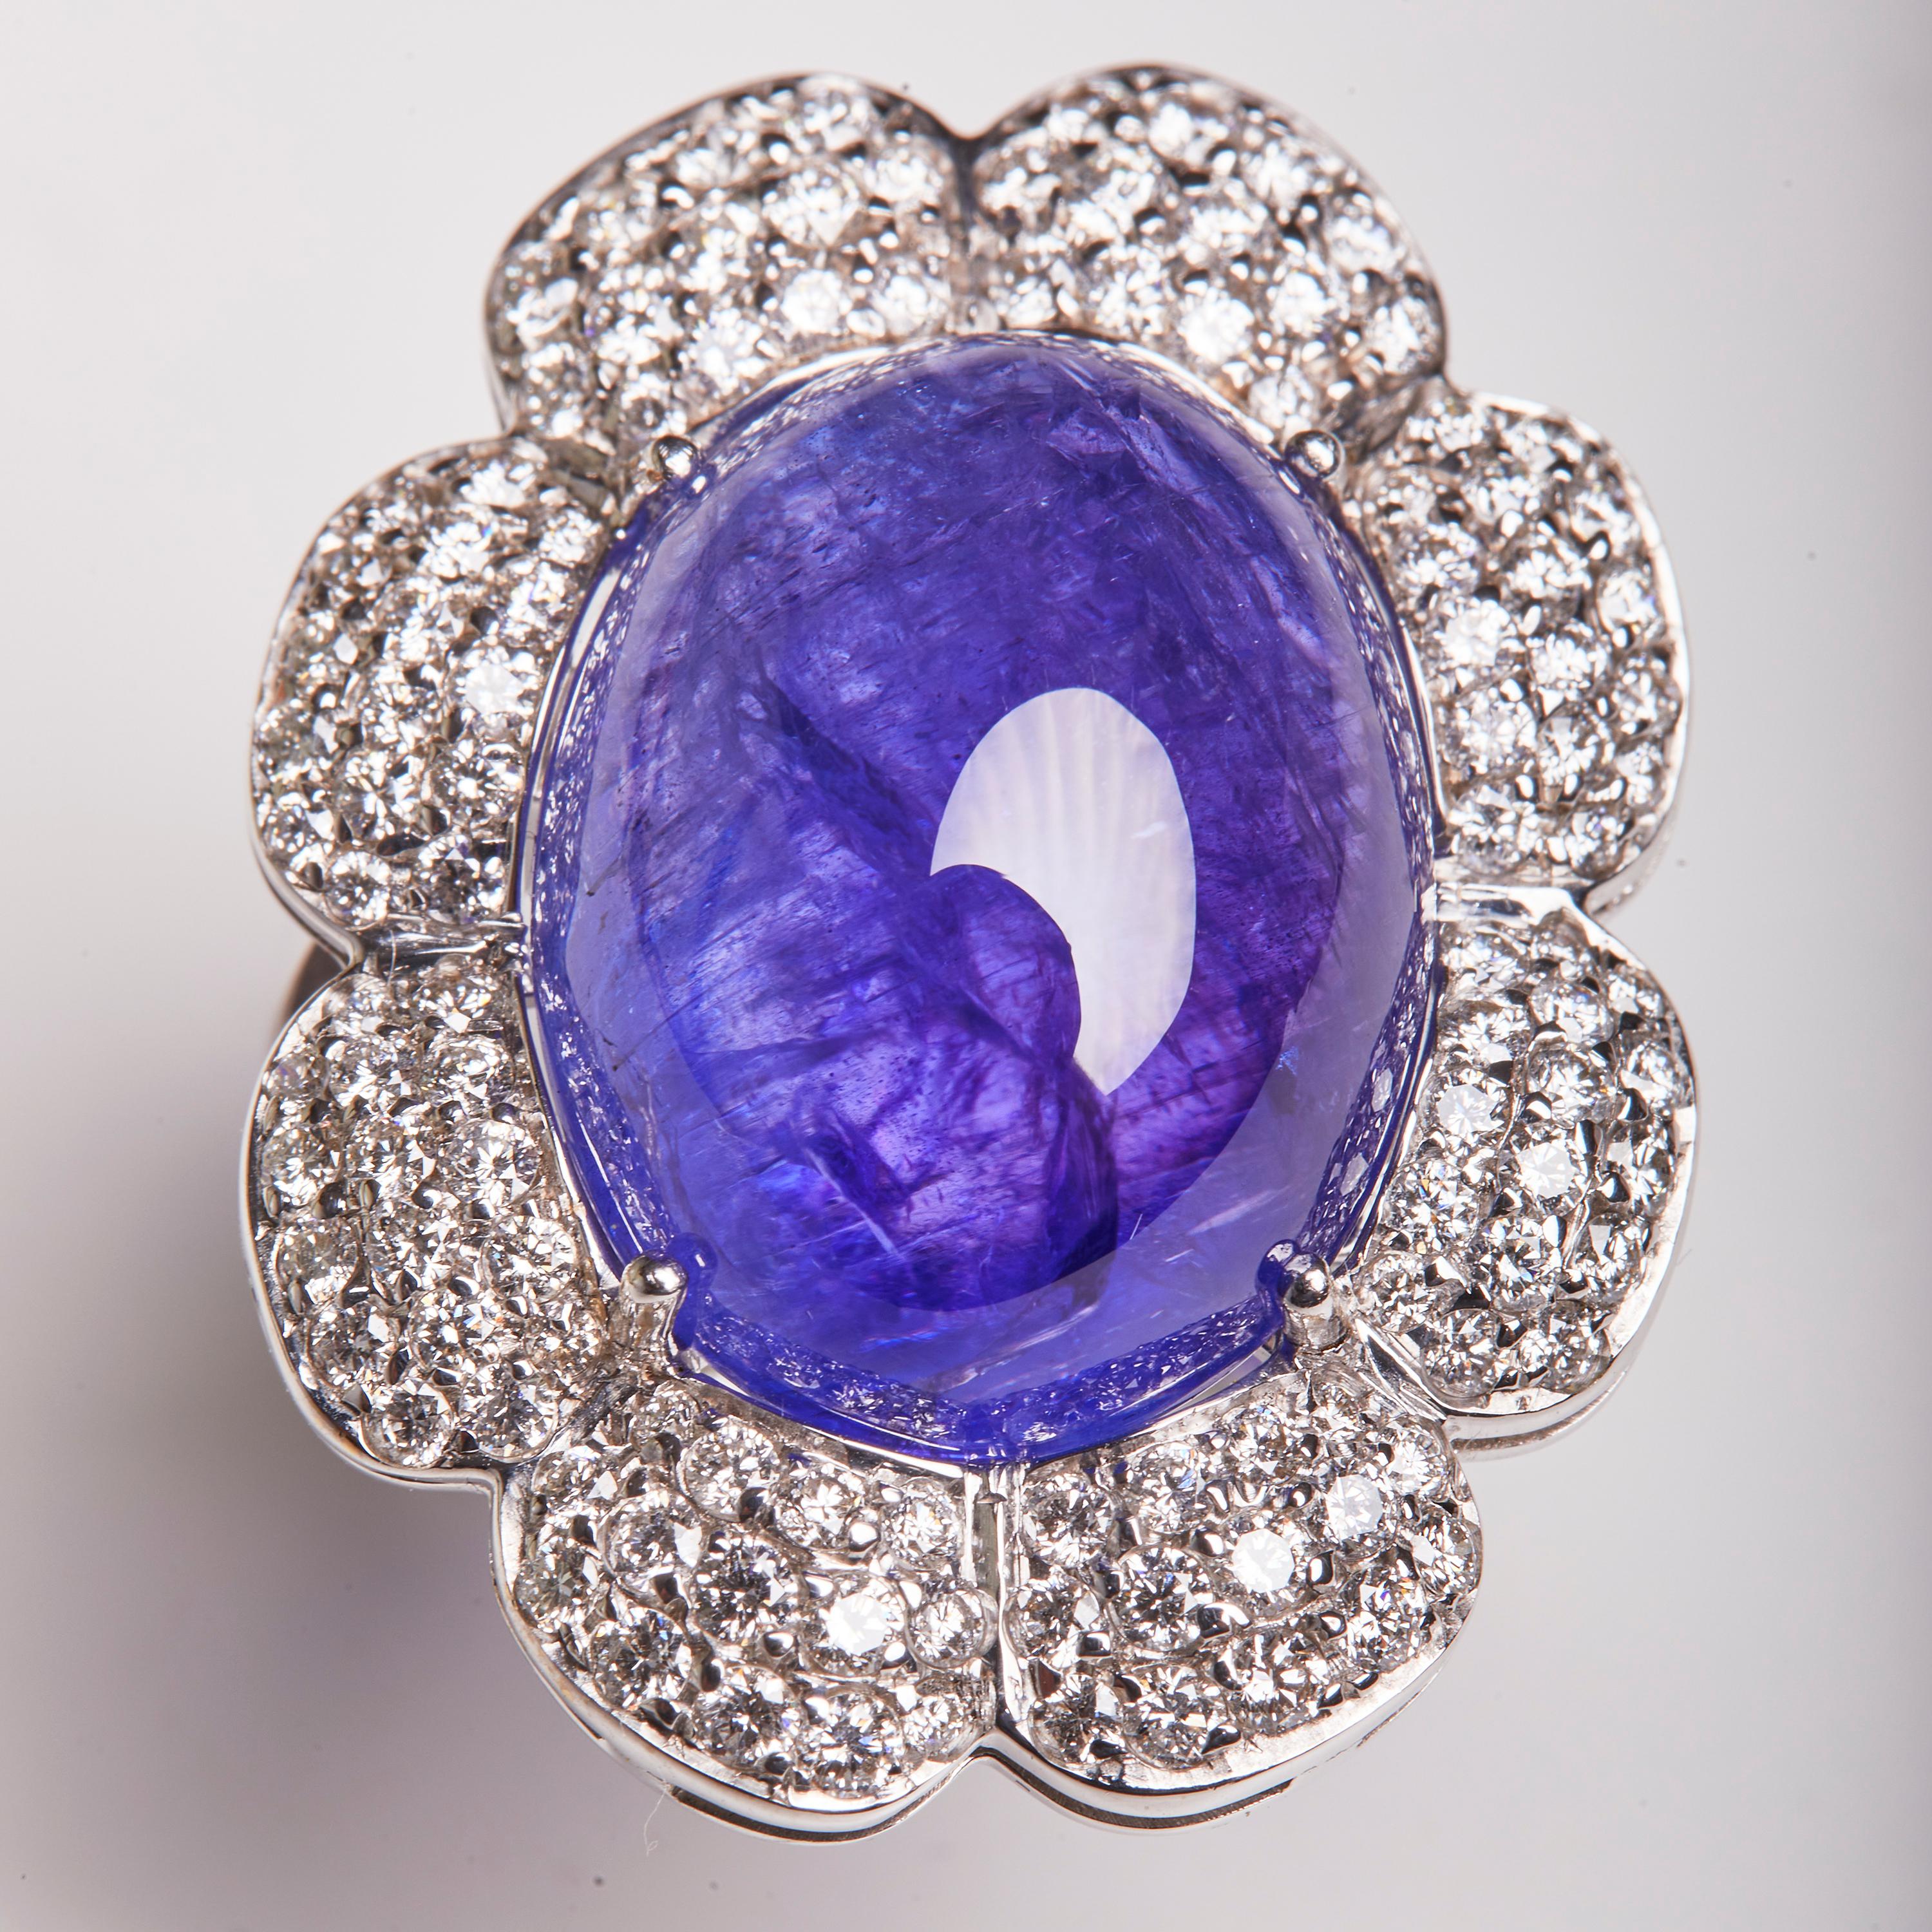 This 18 Karat White Gold Cocktail Ring full of Diamonds highlights a Tanzanite oval shaped center stone. This ring is a perfect compliment to our 18 Karat White Gold Diamond and Tanzanite Earrings and 18 Karat White Gold Diamond and Tanzanite Chain